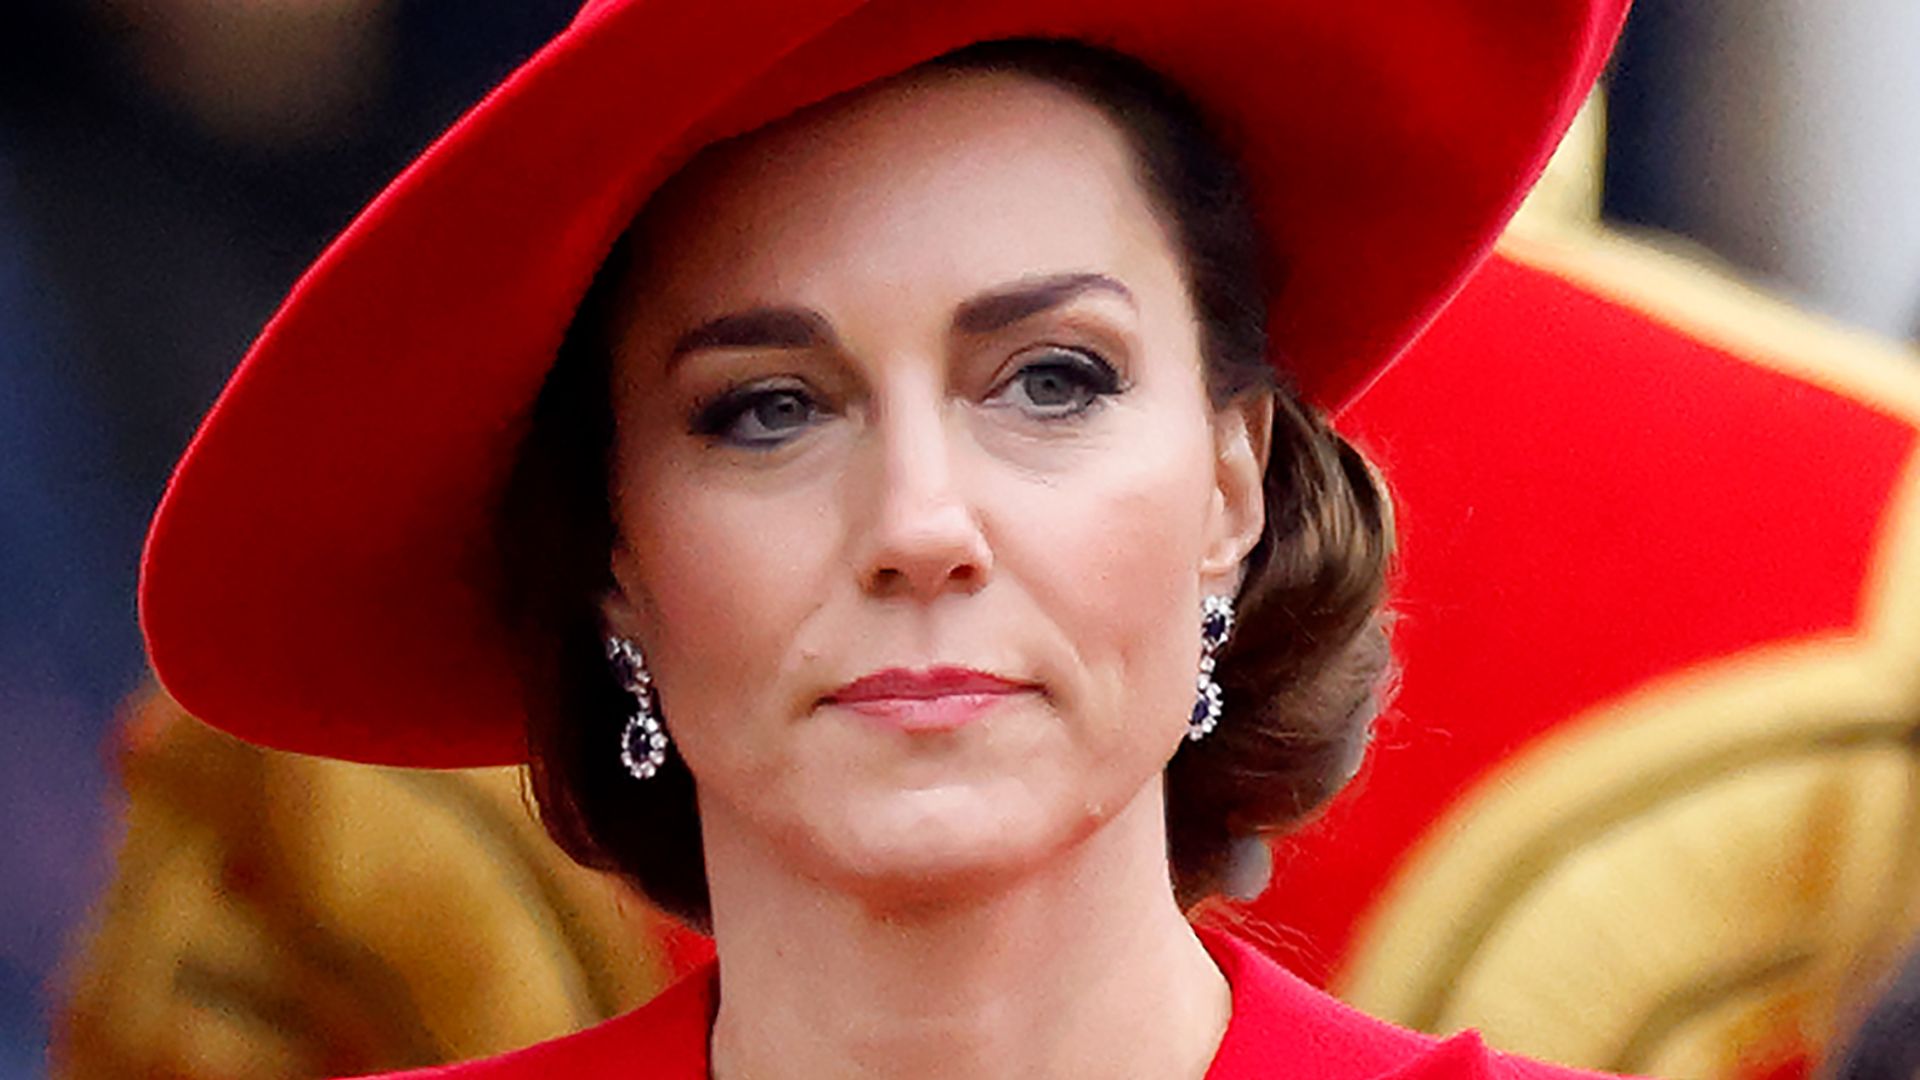 Revealed Kate Middleton's one family member who makes her 'lose her